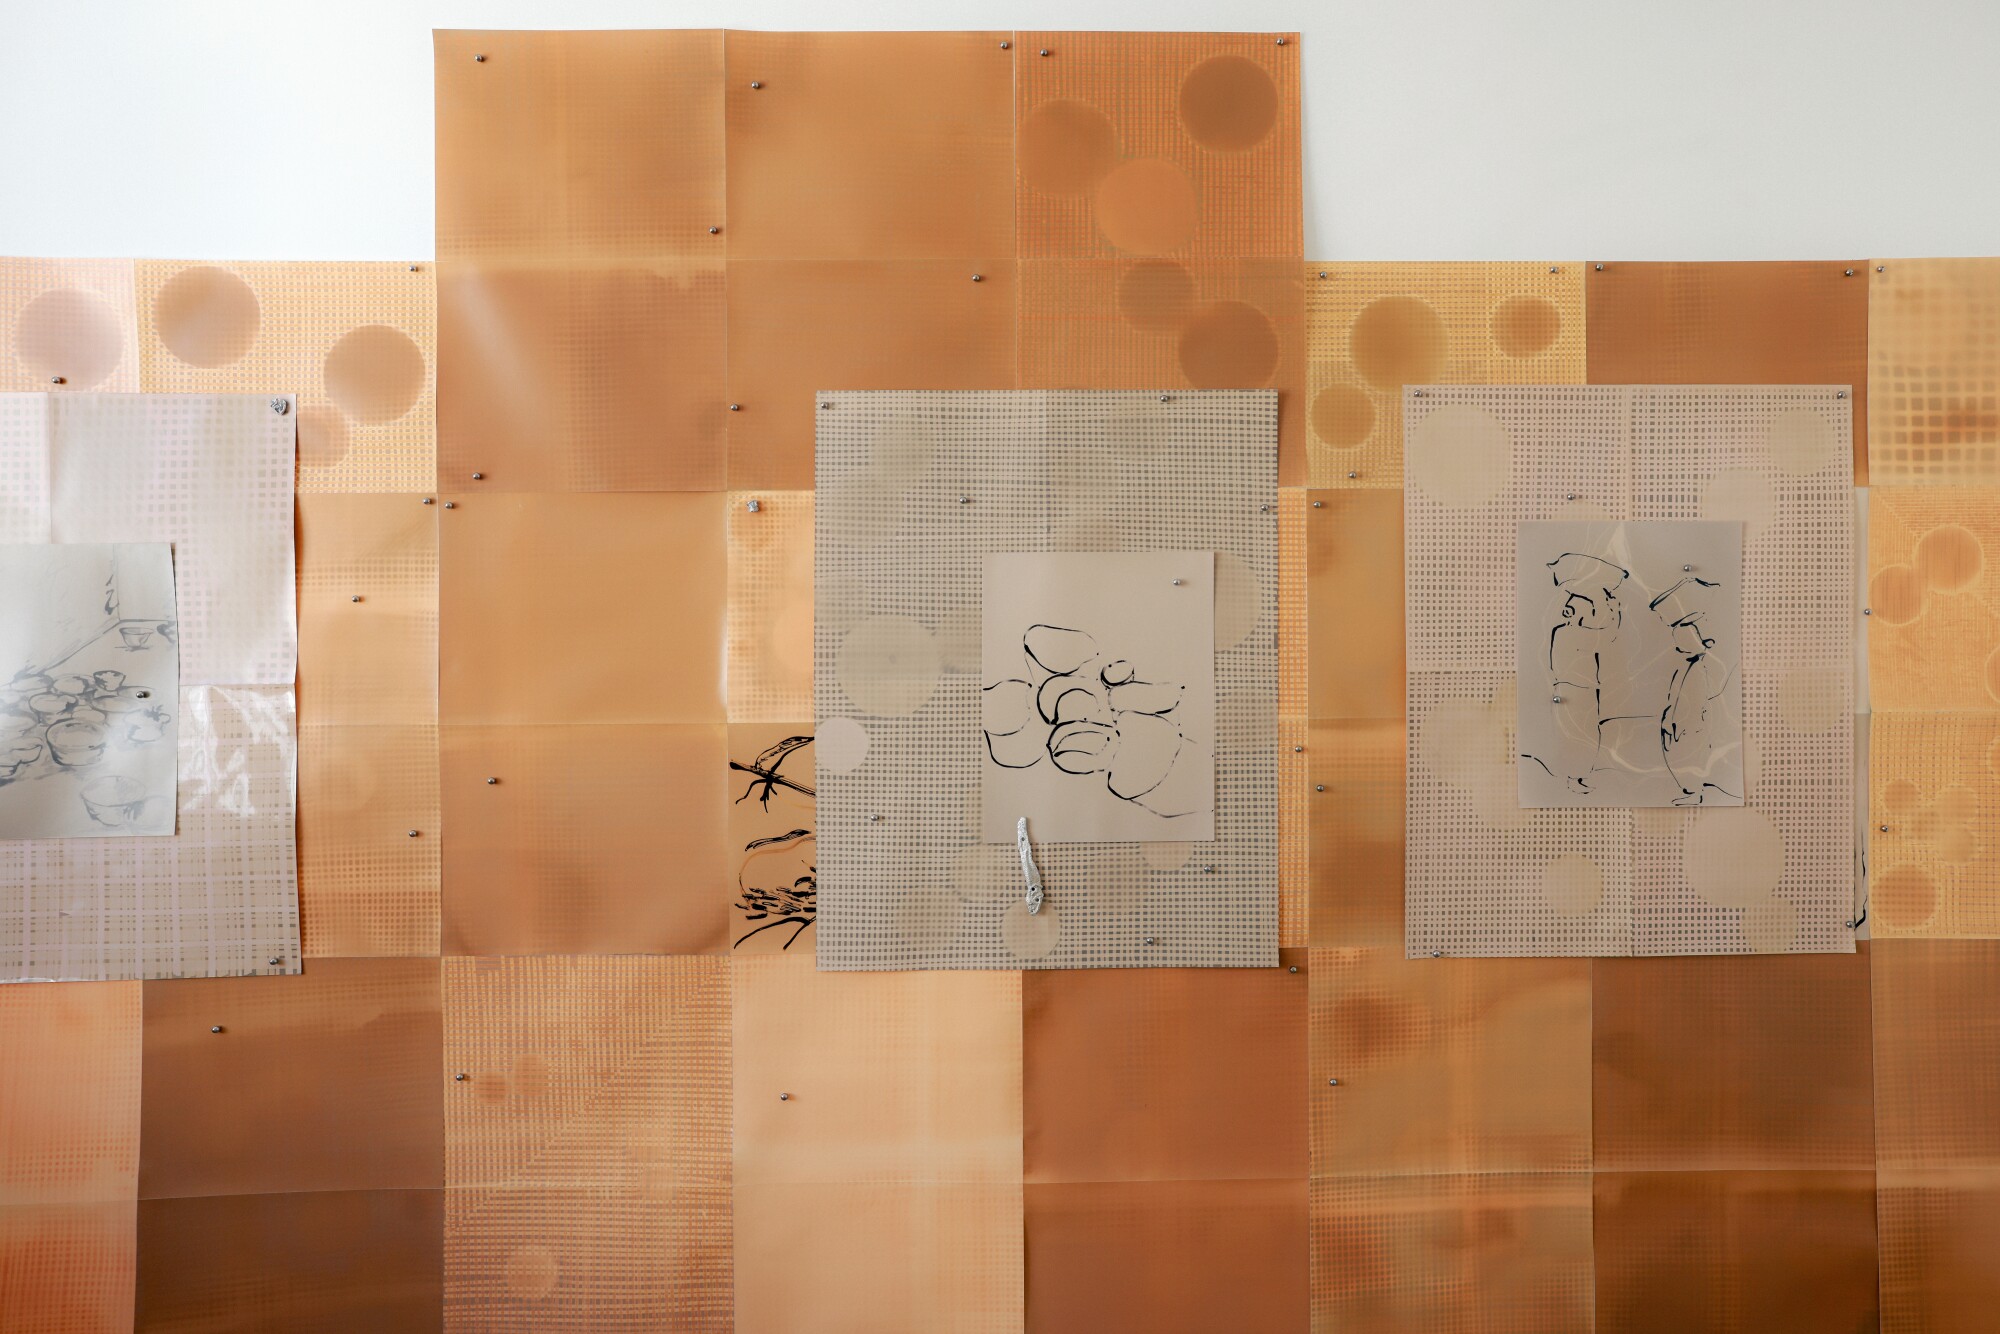 A series of photograms, collaged works featuring line drawings and cast rubber formations, is called “Mesoderm.”